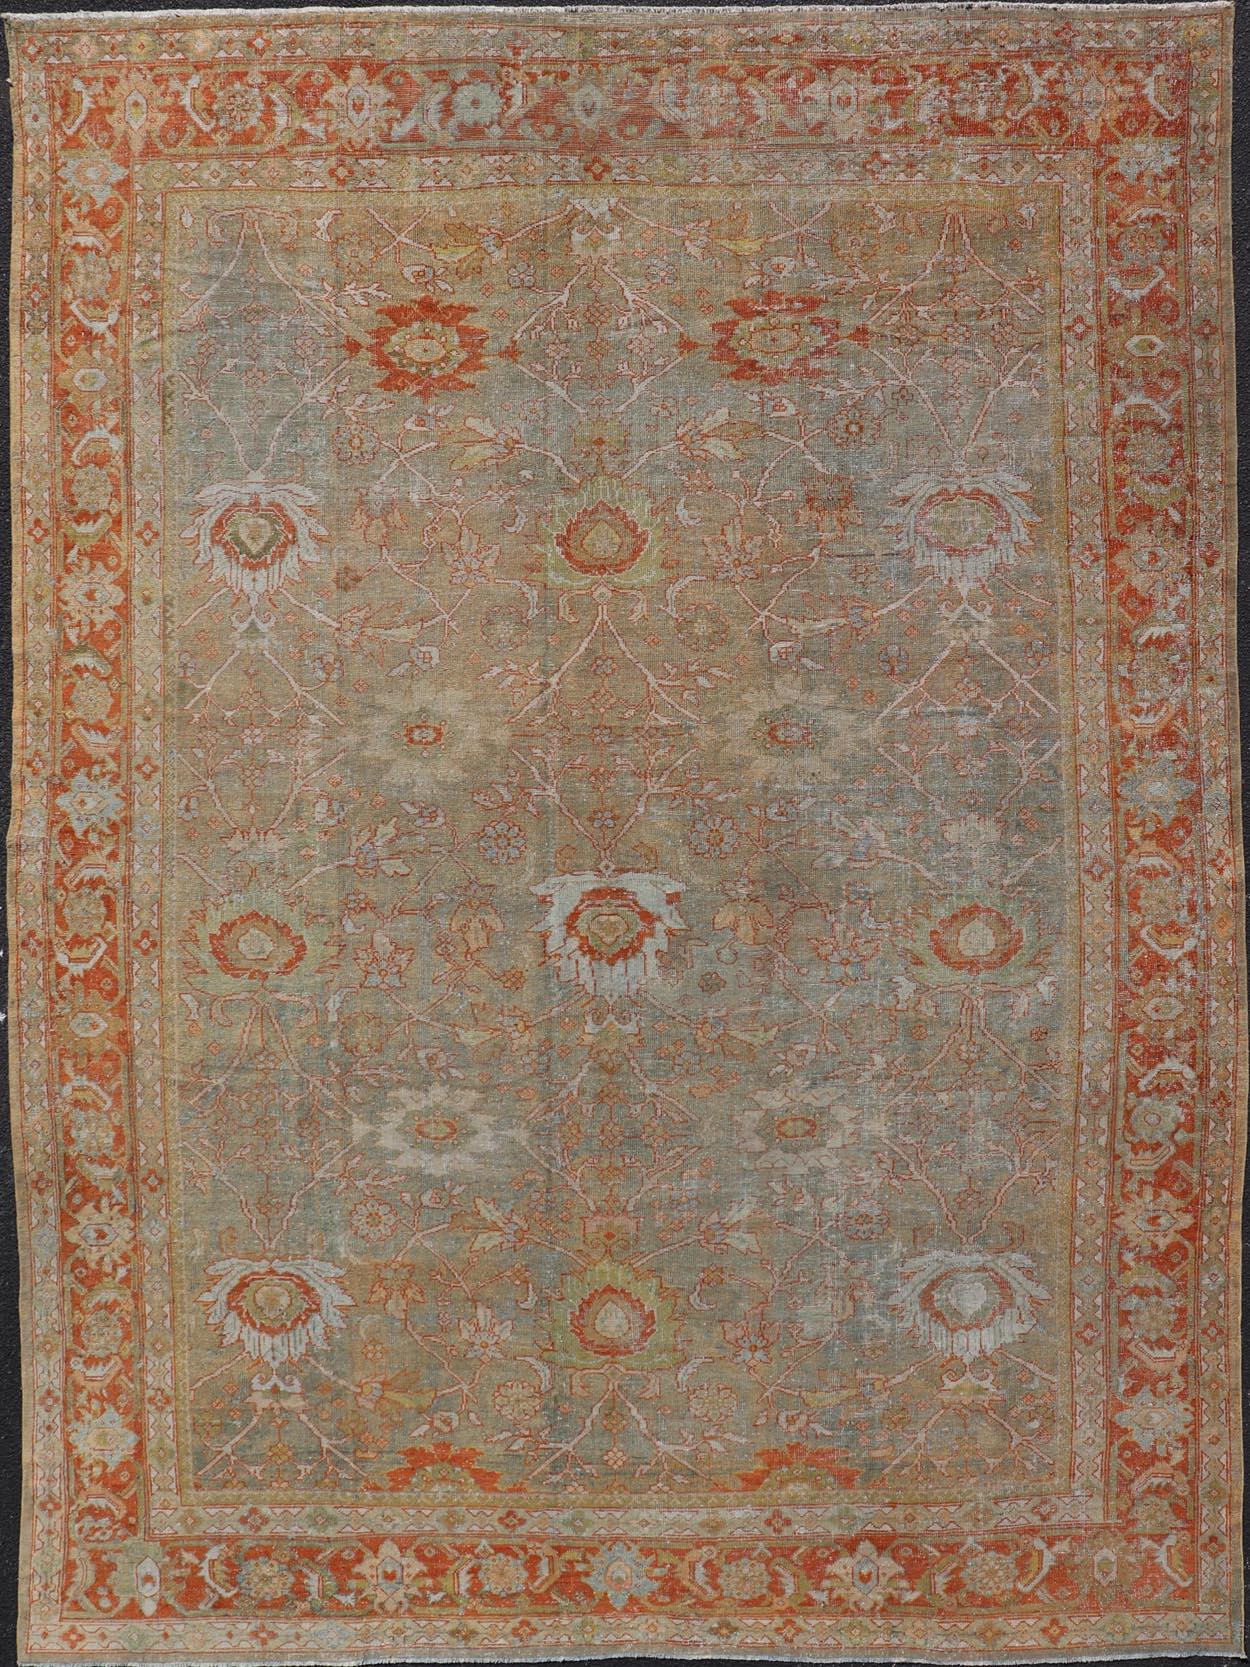 Antique Persian Distressed Sultanabad Rug in Light Green, Lt. Blue, Green, Red